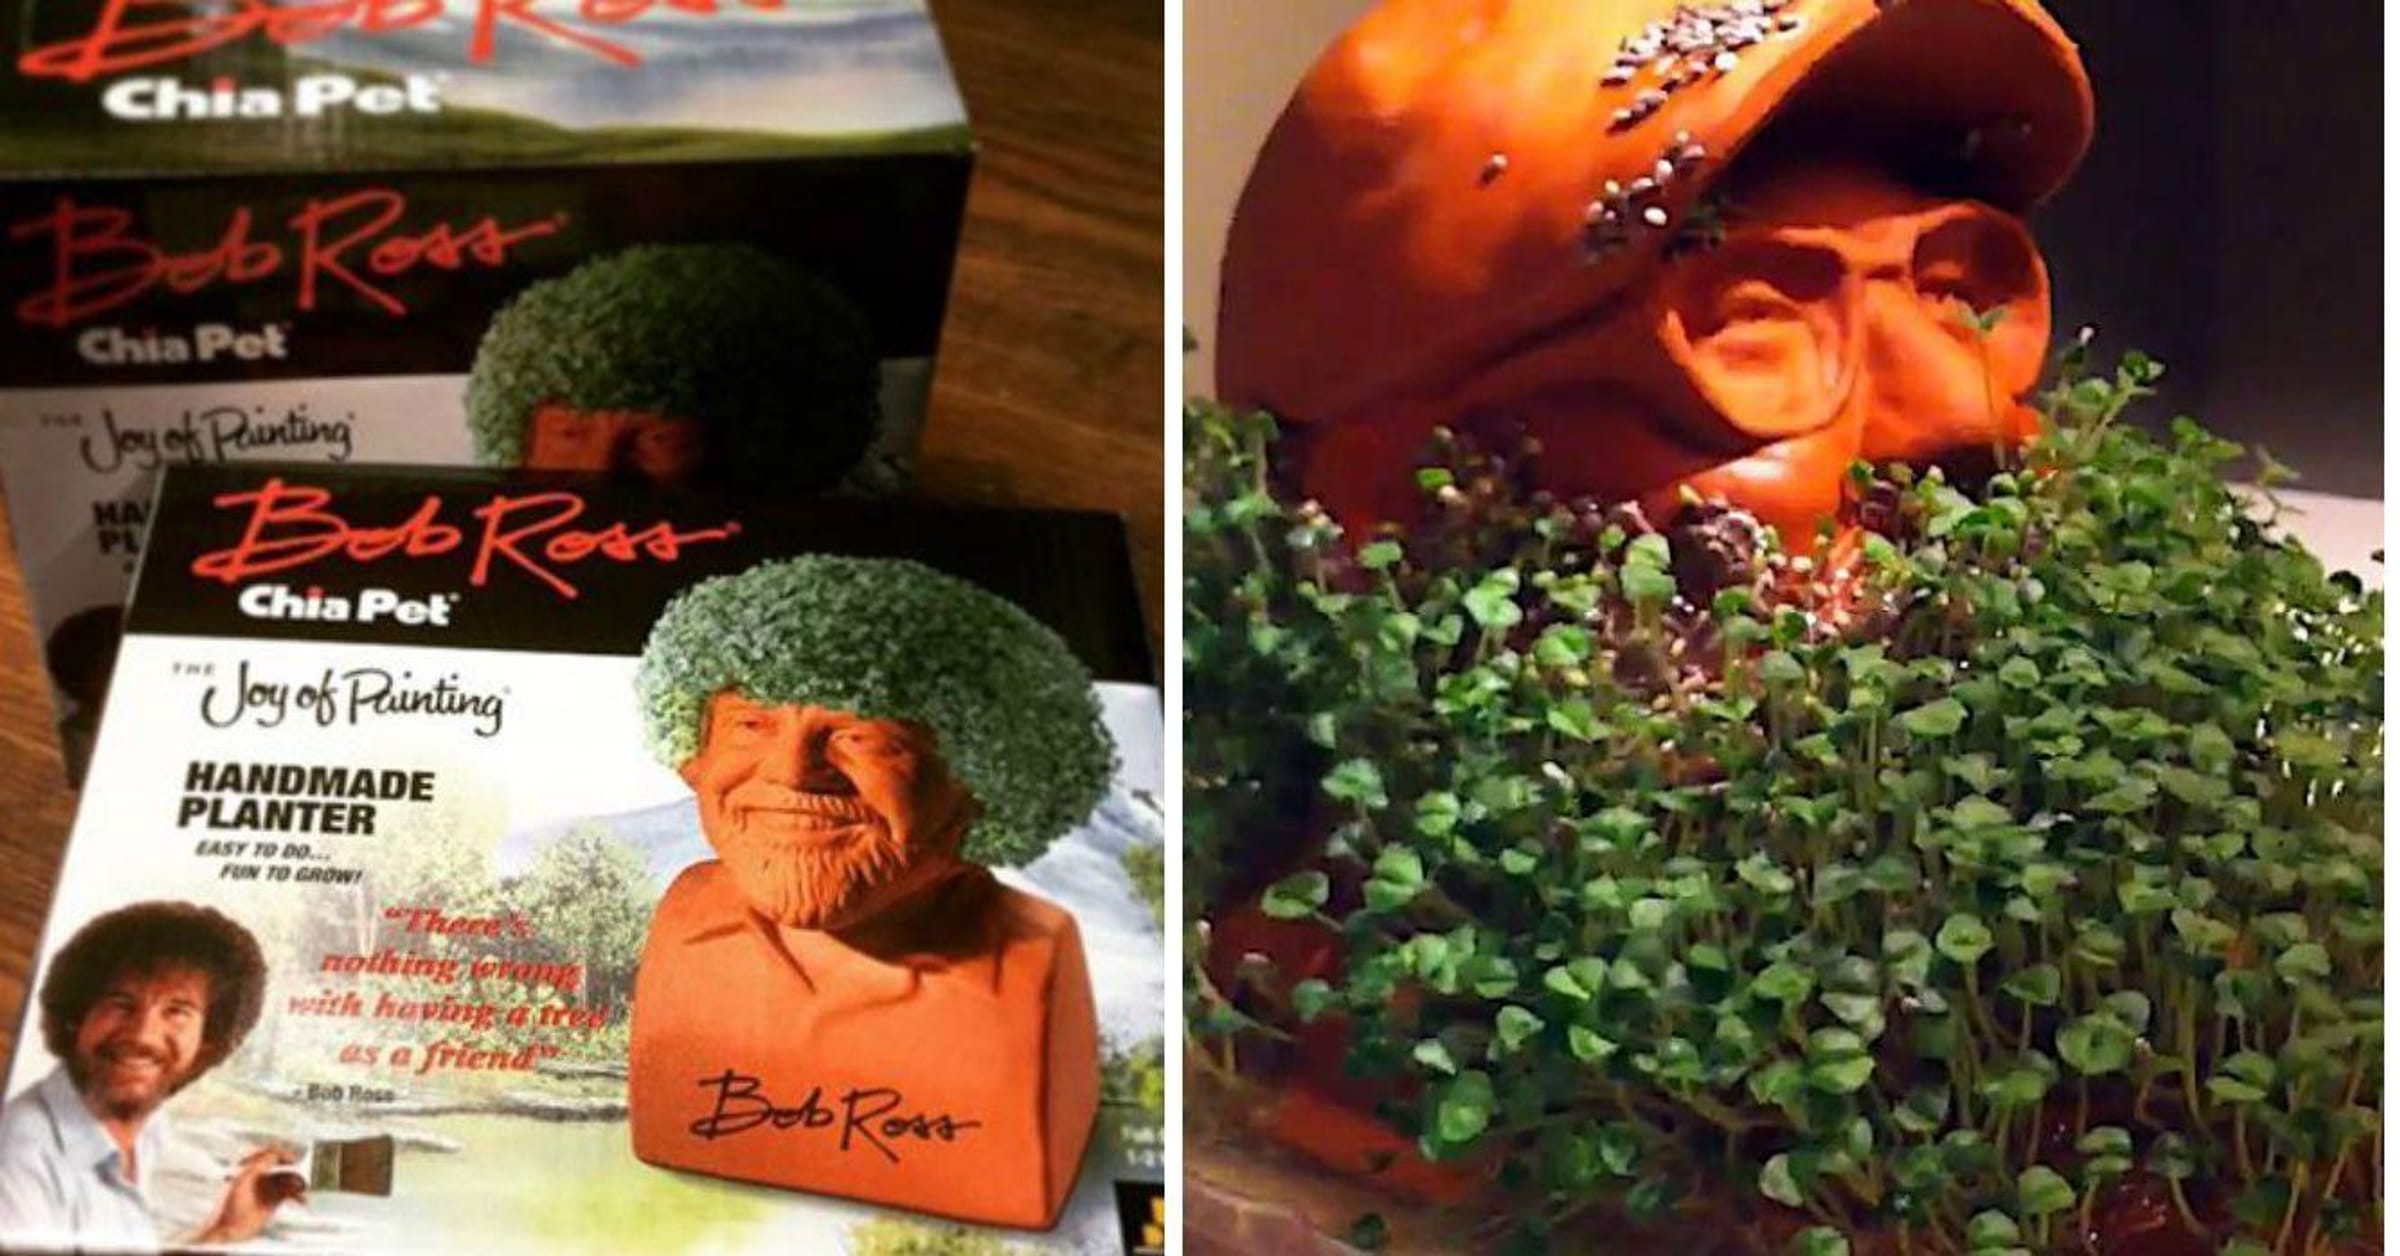 I bought this Bob Ross chia pet . . . These are not happy trees